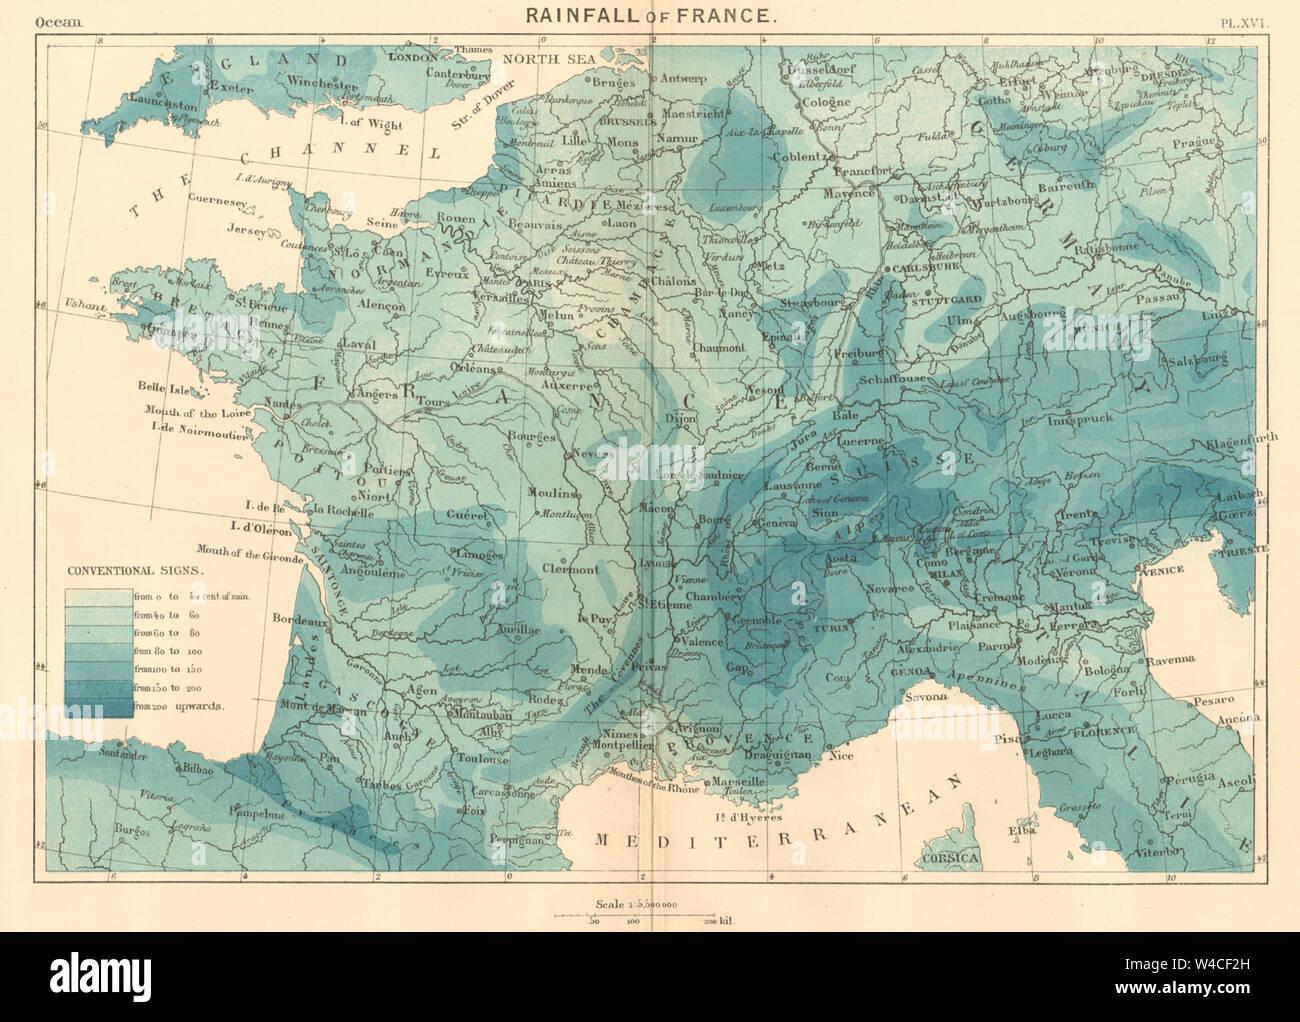 The Rainfall of France 1886 old antique vintage map plan chart Stock Photo